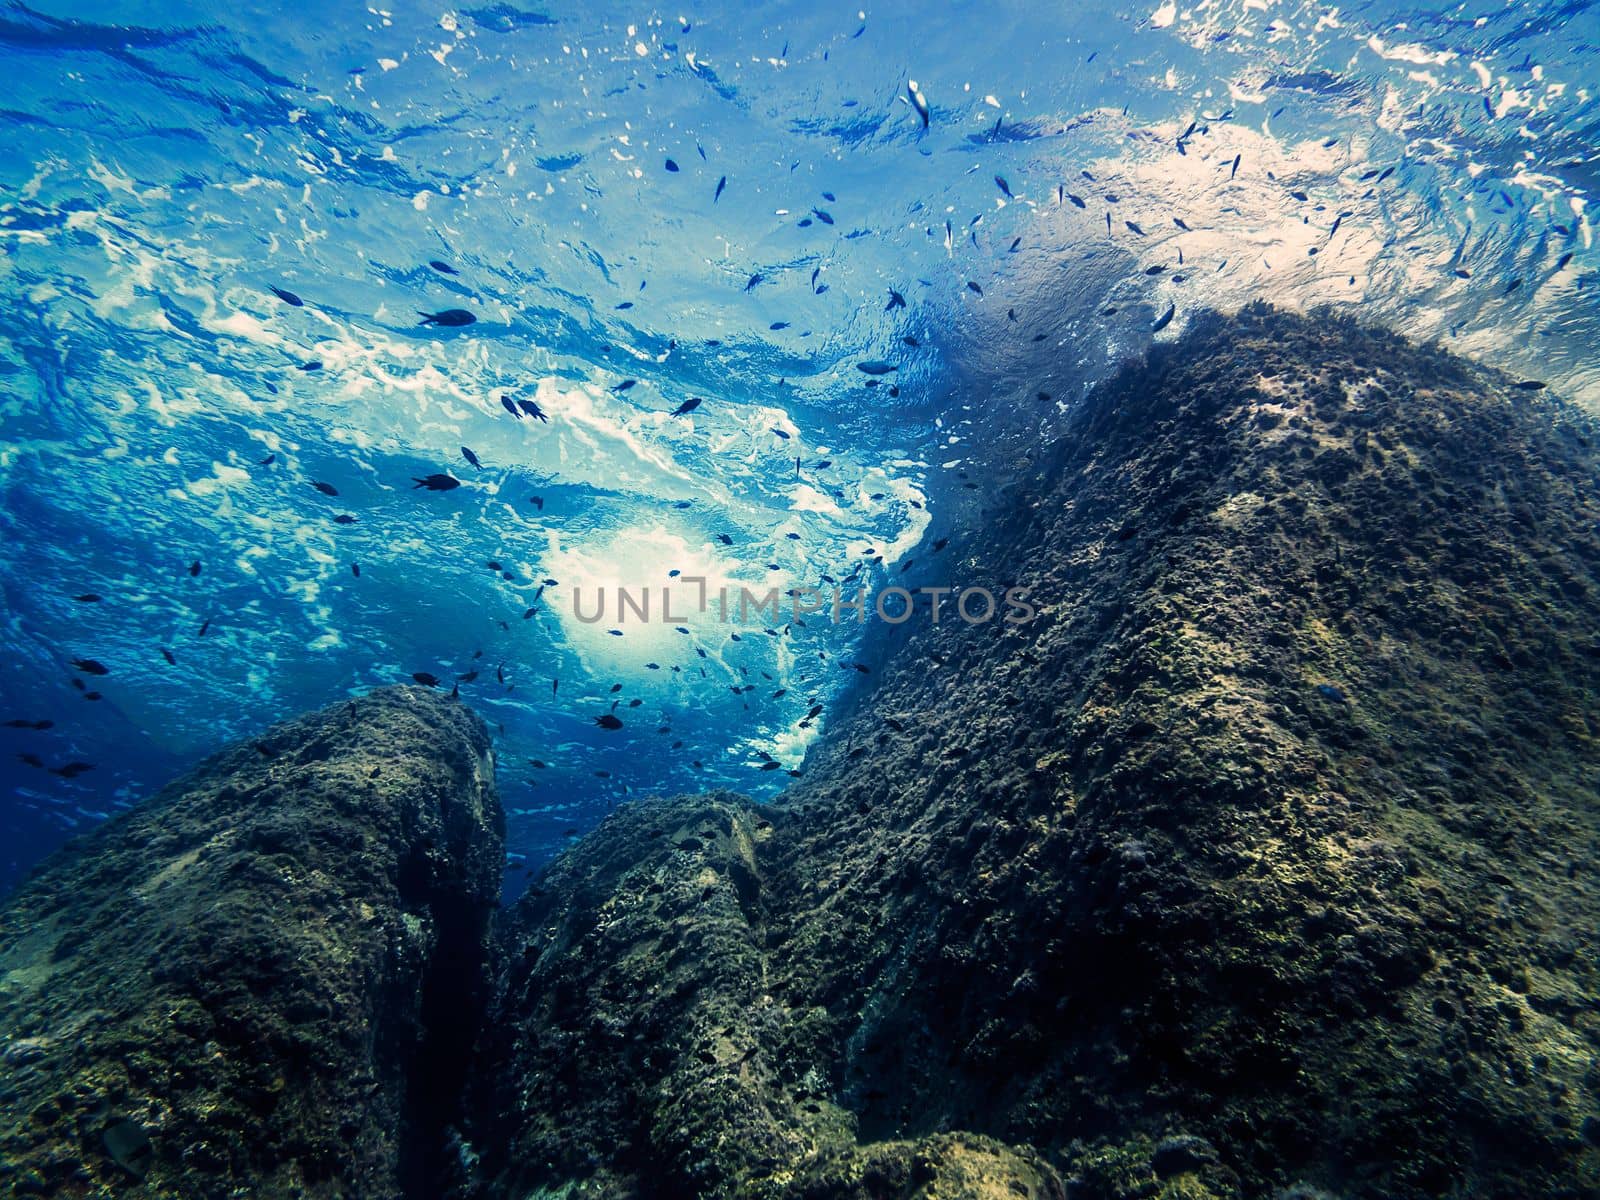 shot from bottom to top of the waves beating against the rocks, some small fish swim through the blue and crystal clear water and the golden sun reflects off the marine surface